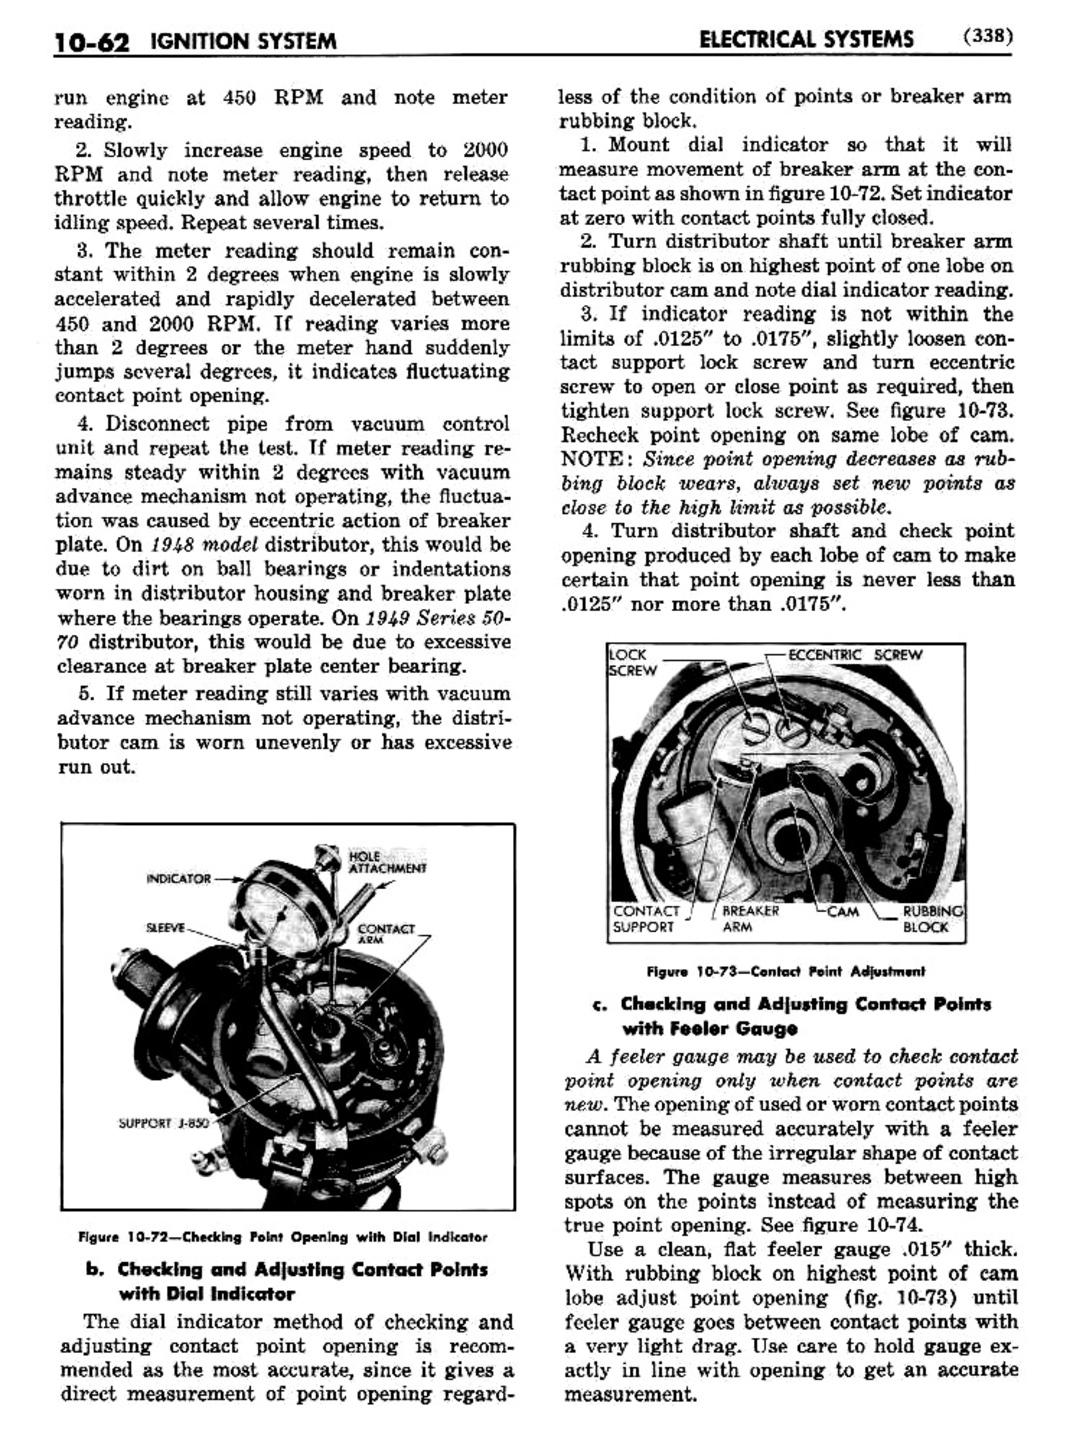 n_11 1948 Buick Shop Manual - Electrical Systems-062-062.jpg